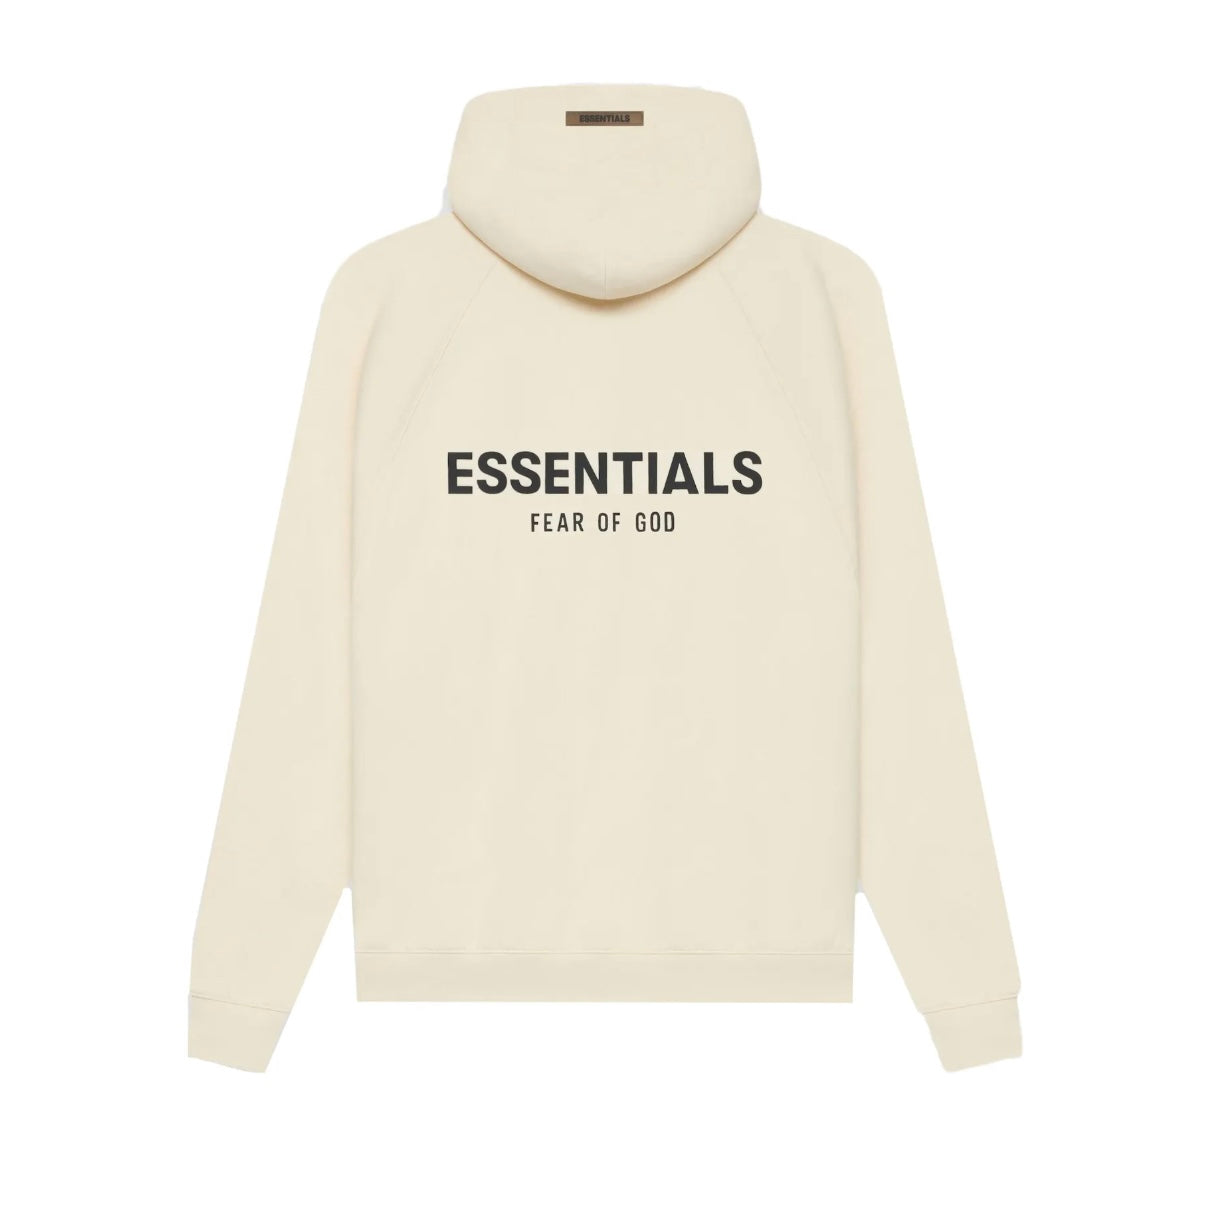 FEAR OF GOD ESSENTIALS PULL-OVER HOODIE (FW21) - BUTTERCREAM